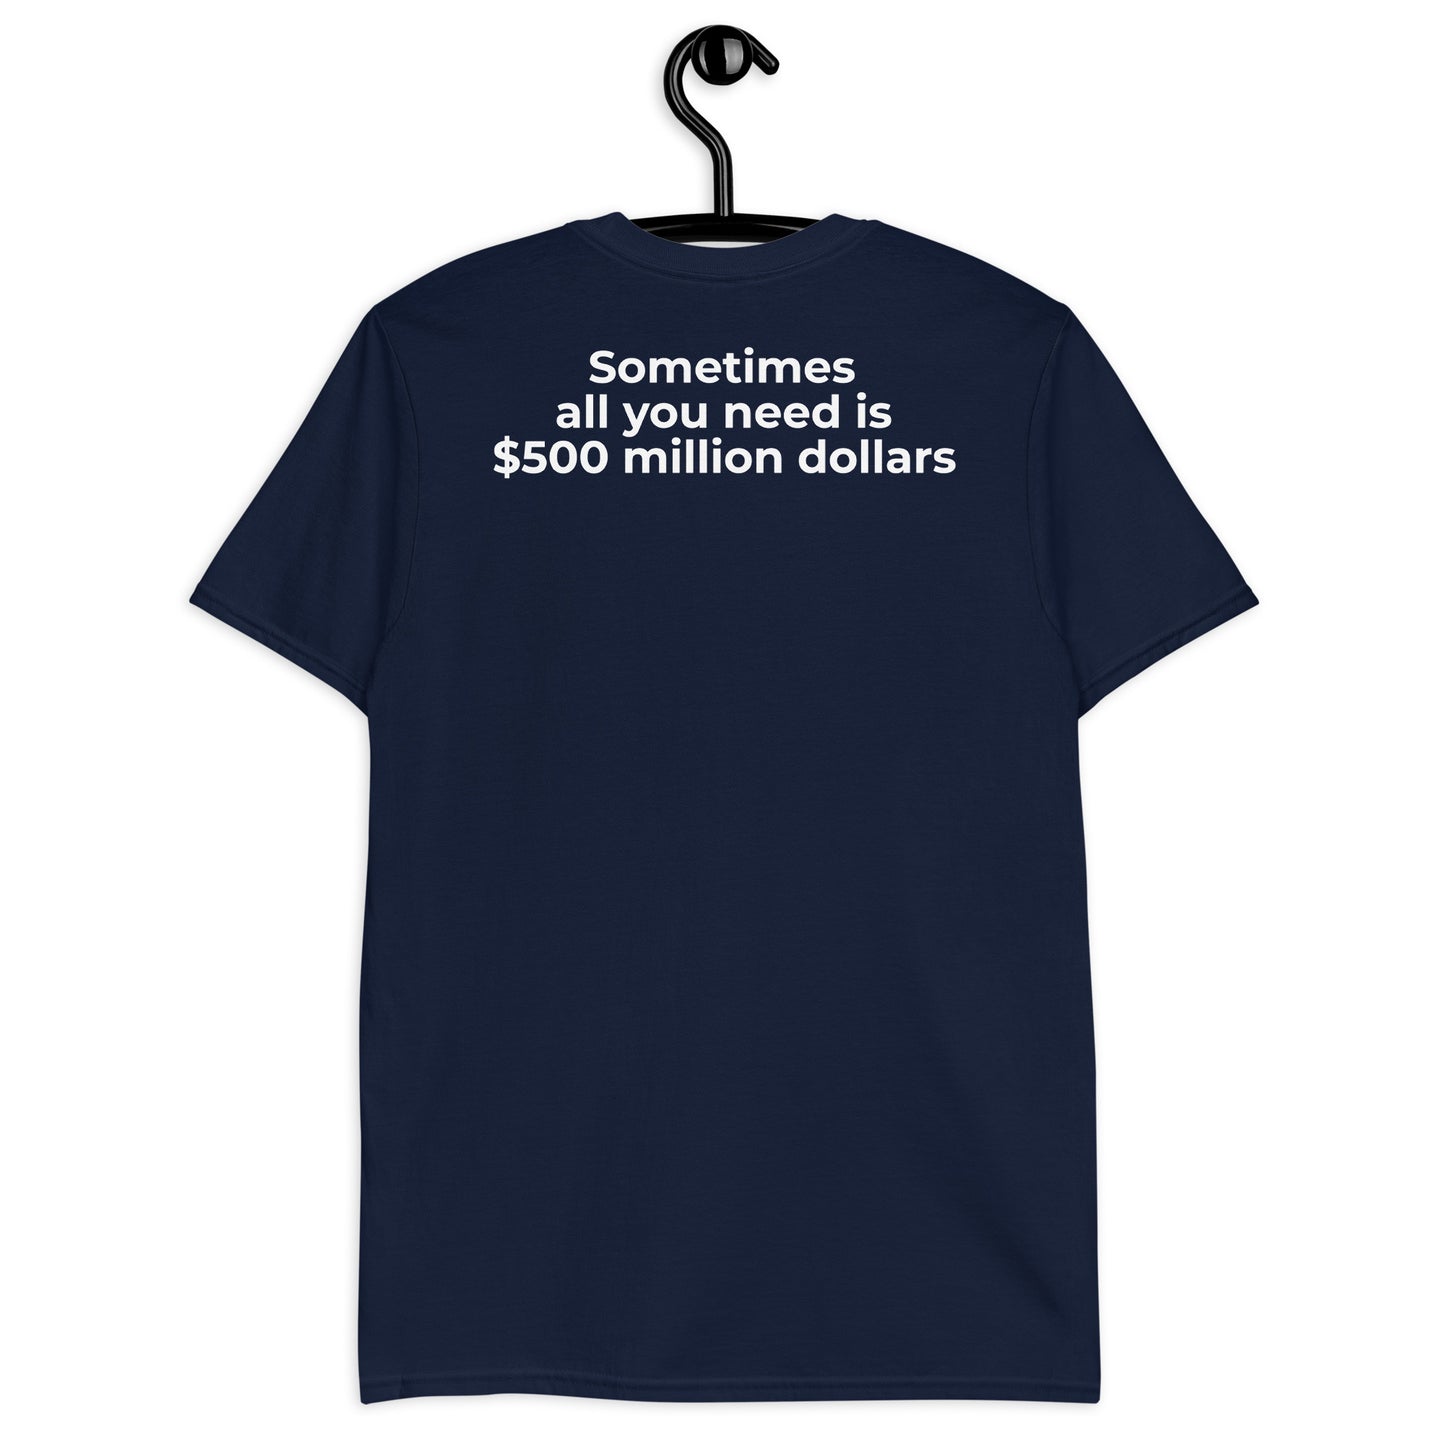 Sometimes all you need is $500 million dollars Short-Sleeve Unisex T-Shirt